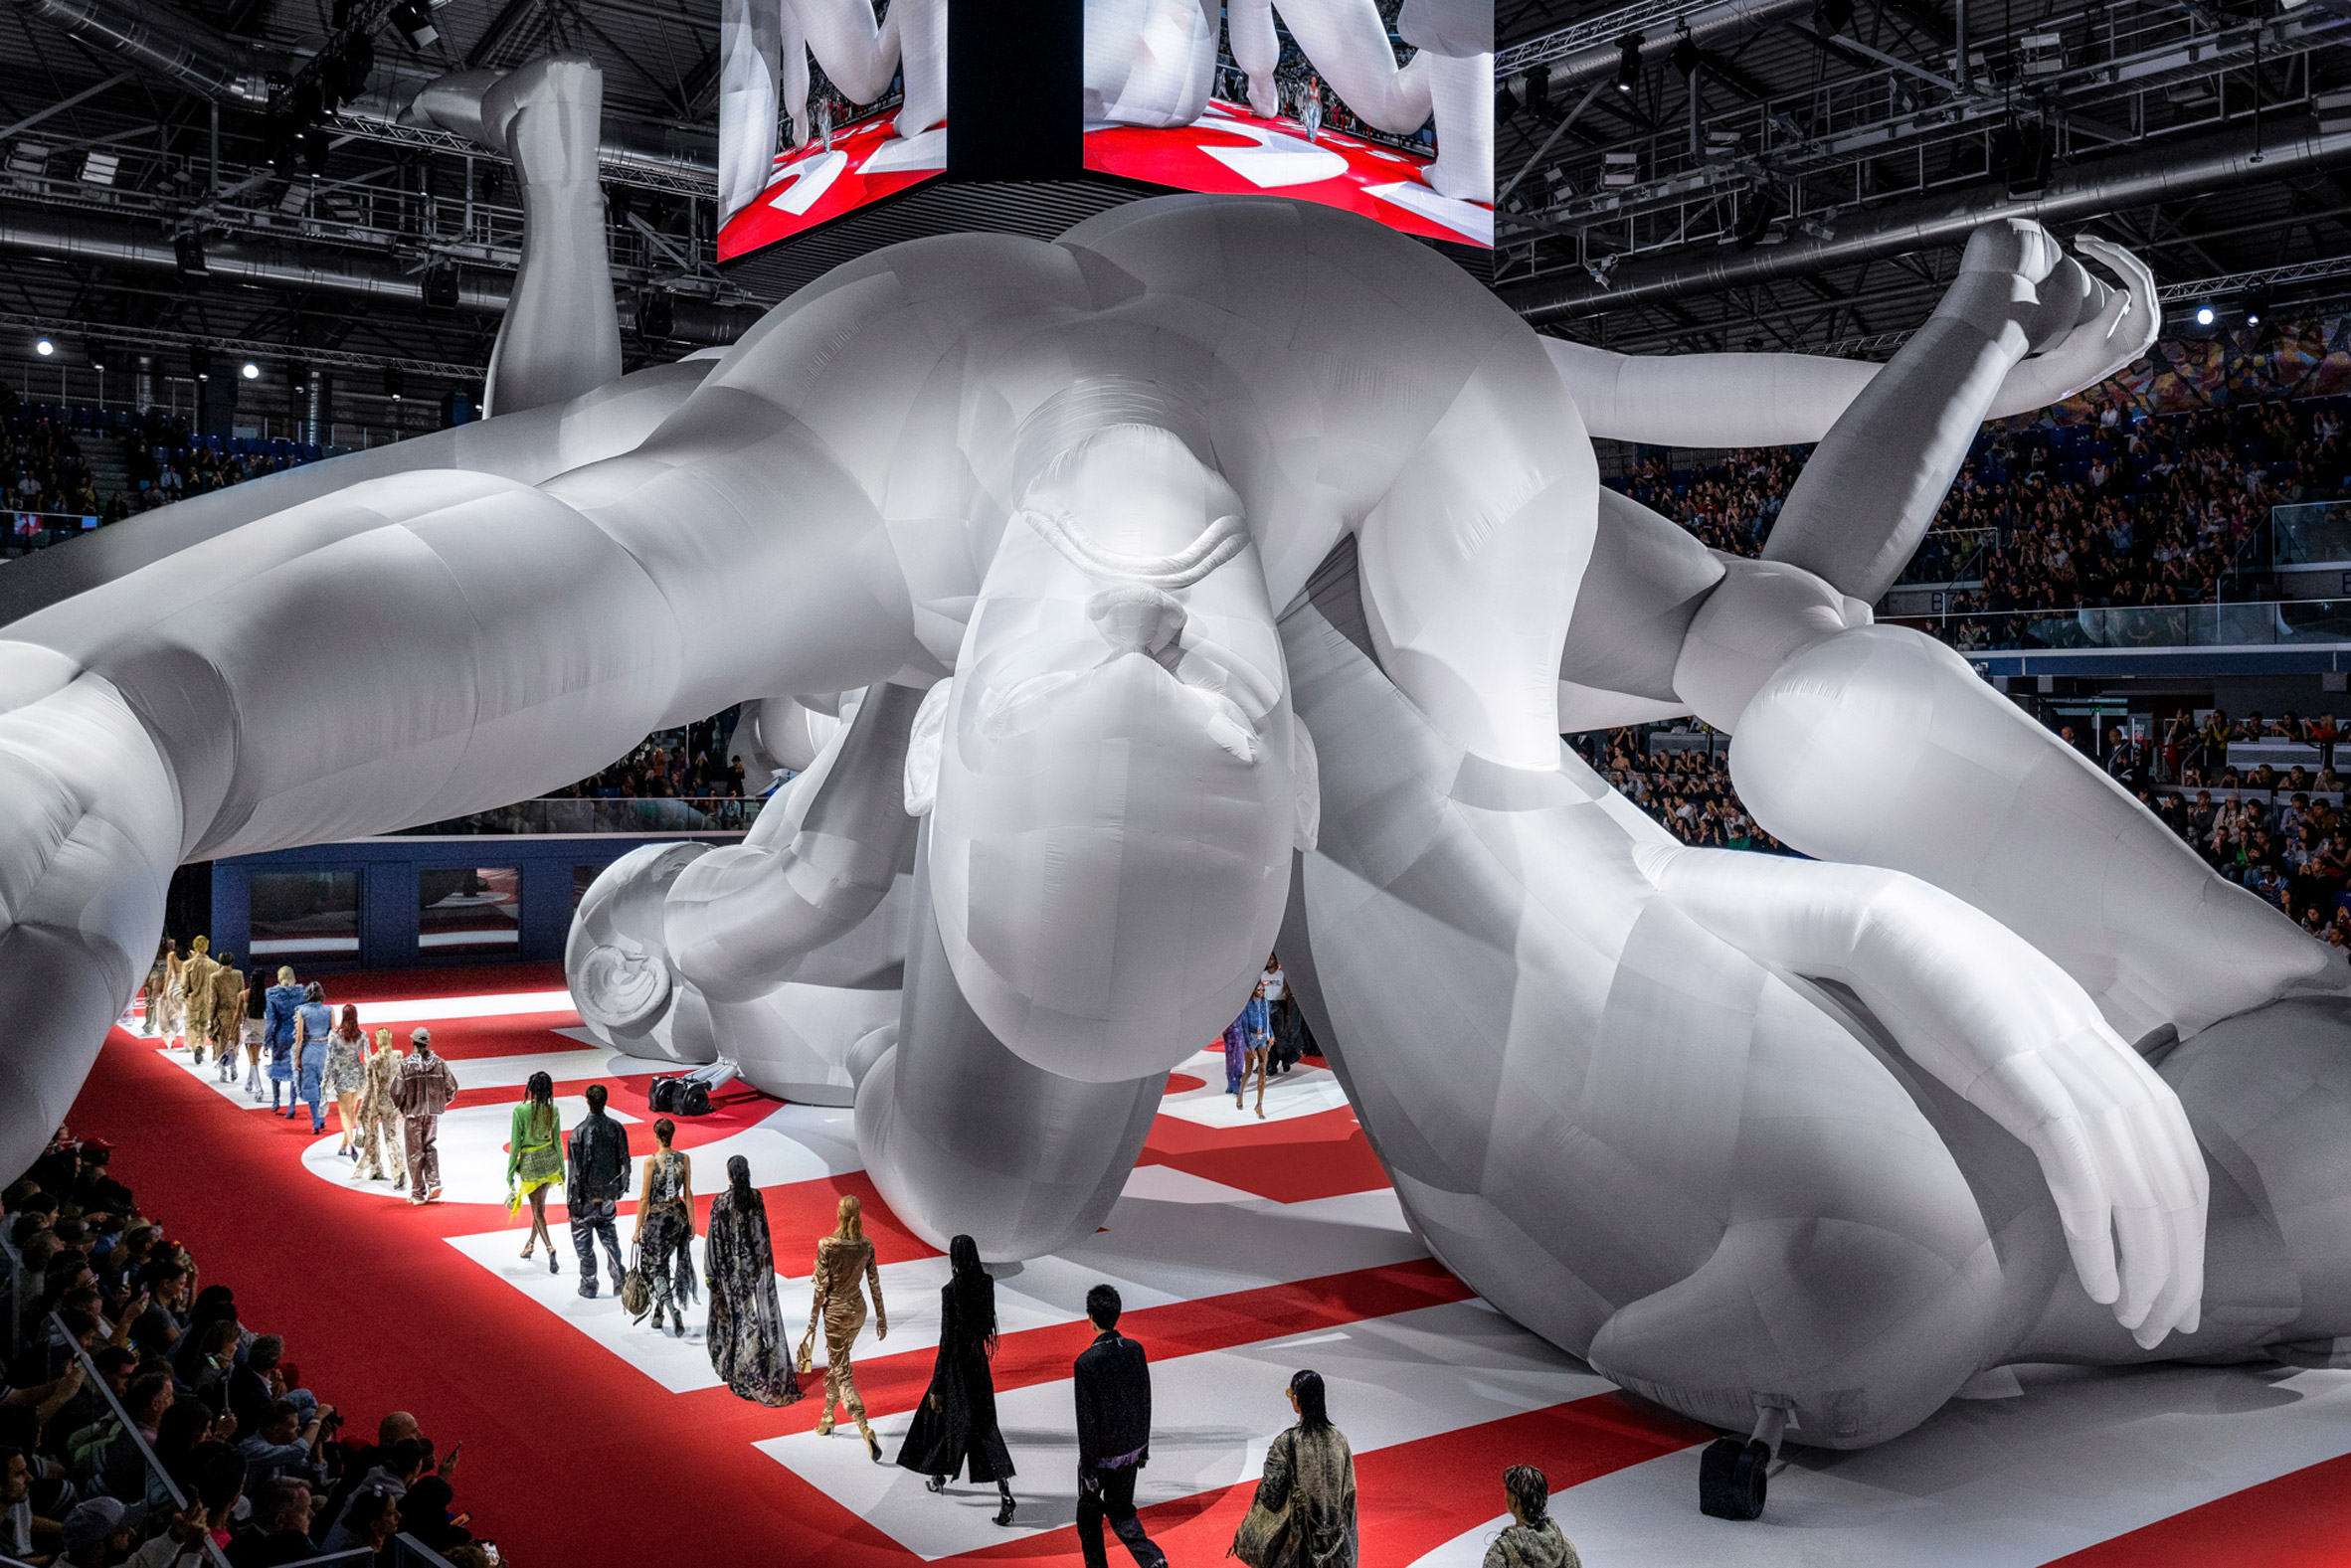 Image of models walking around the World's largest inflatable sculpture at Diesel Spring Summer 2023